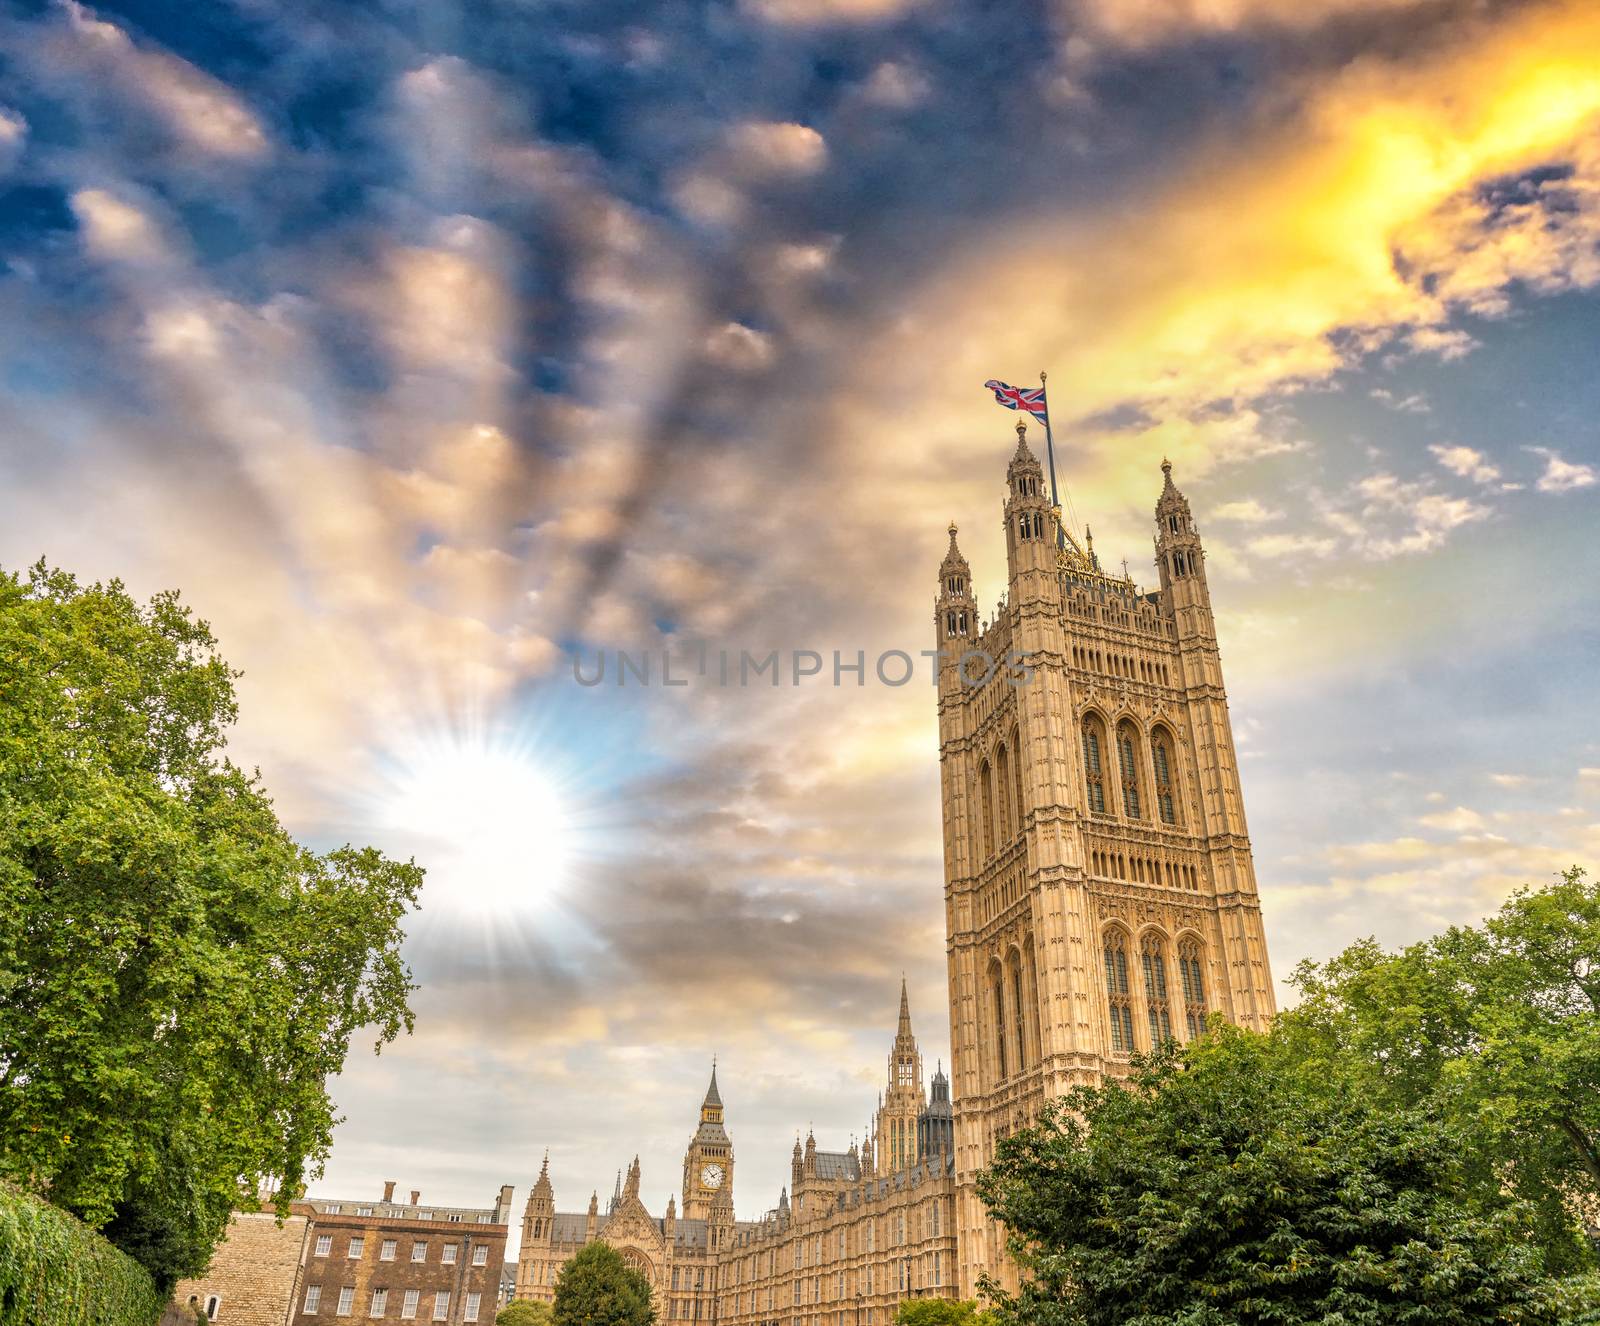 London, Westminster Palace surrounded by trees at dusk by jovannig